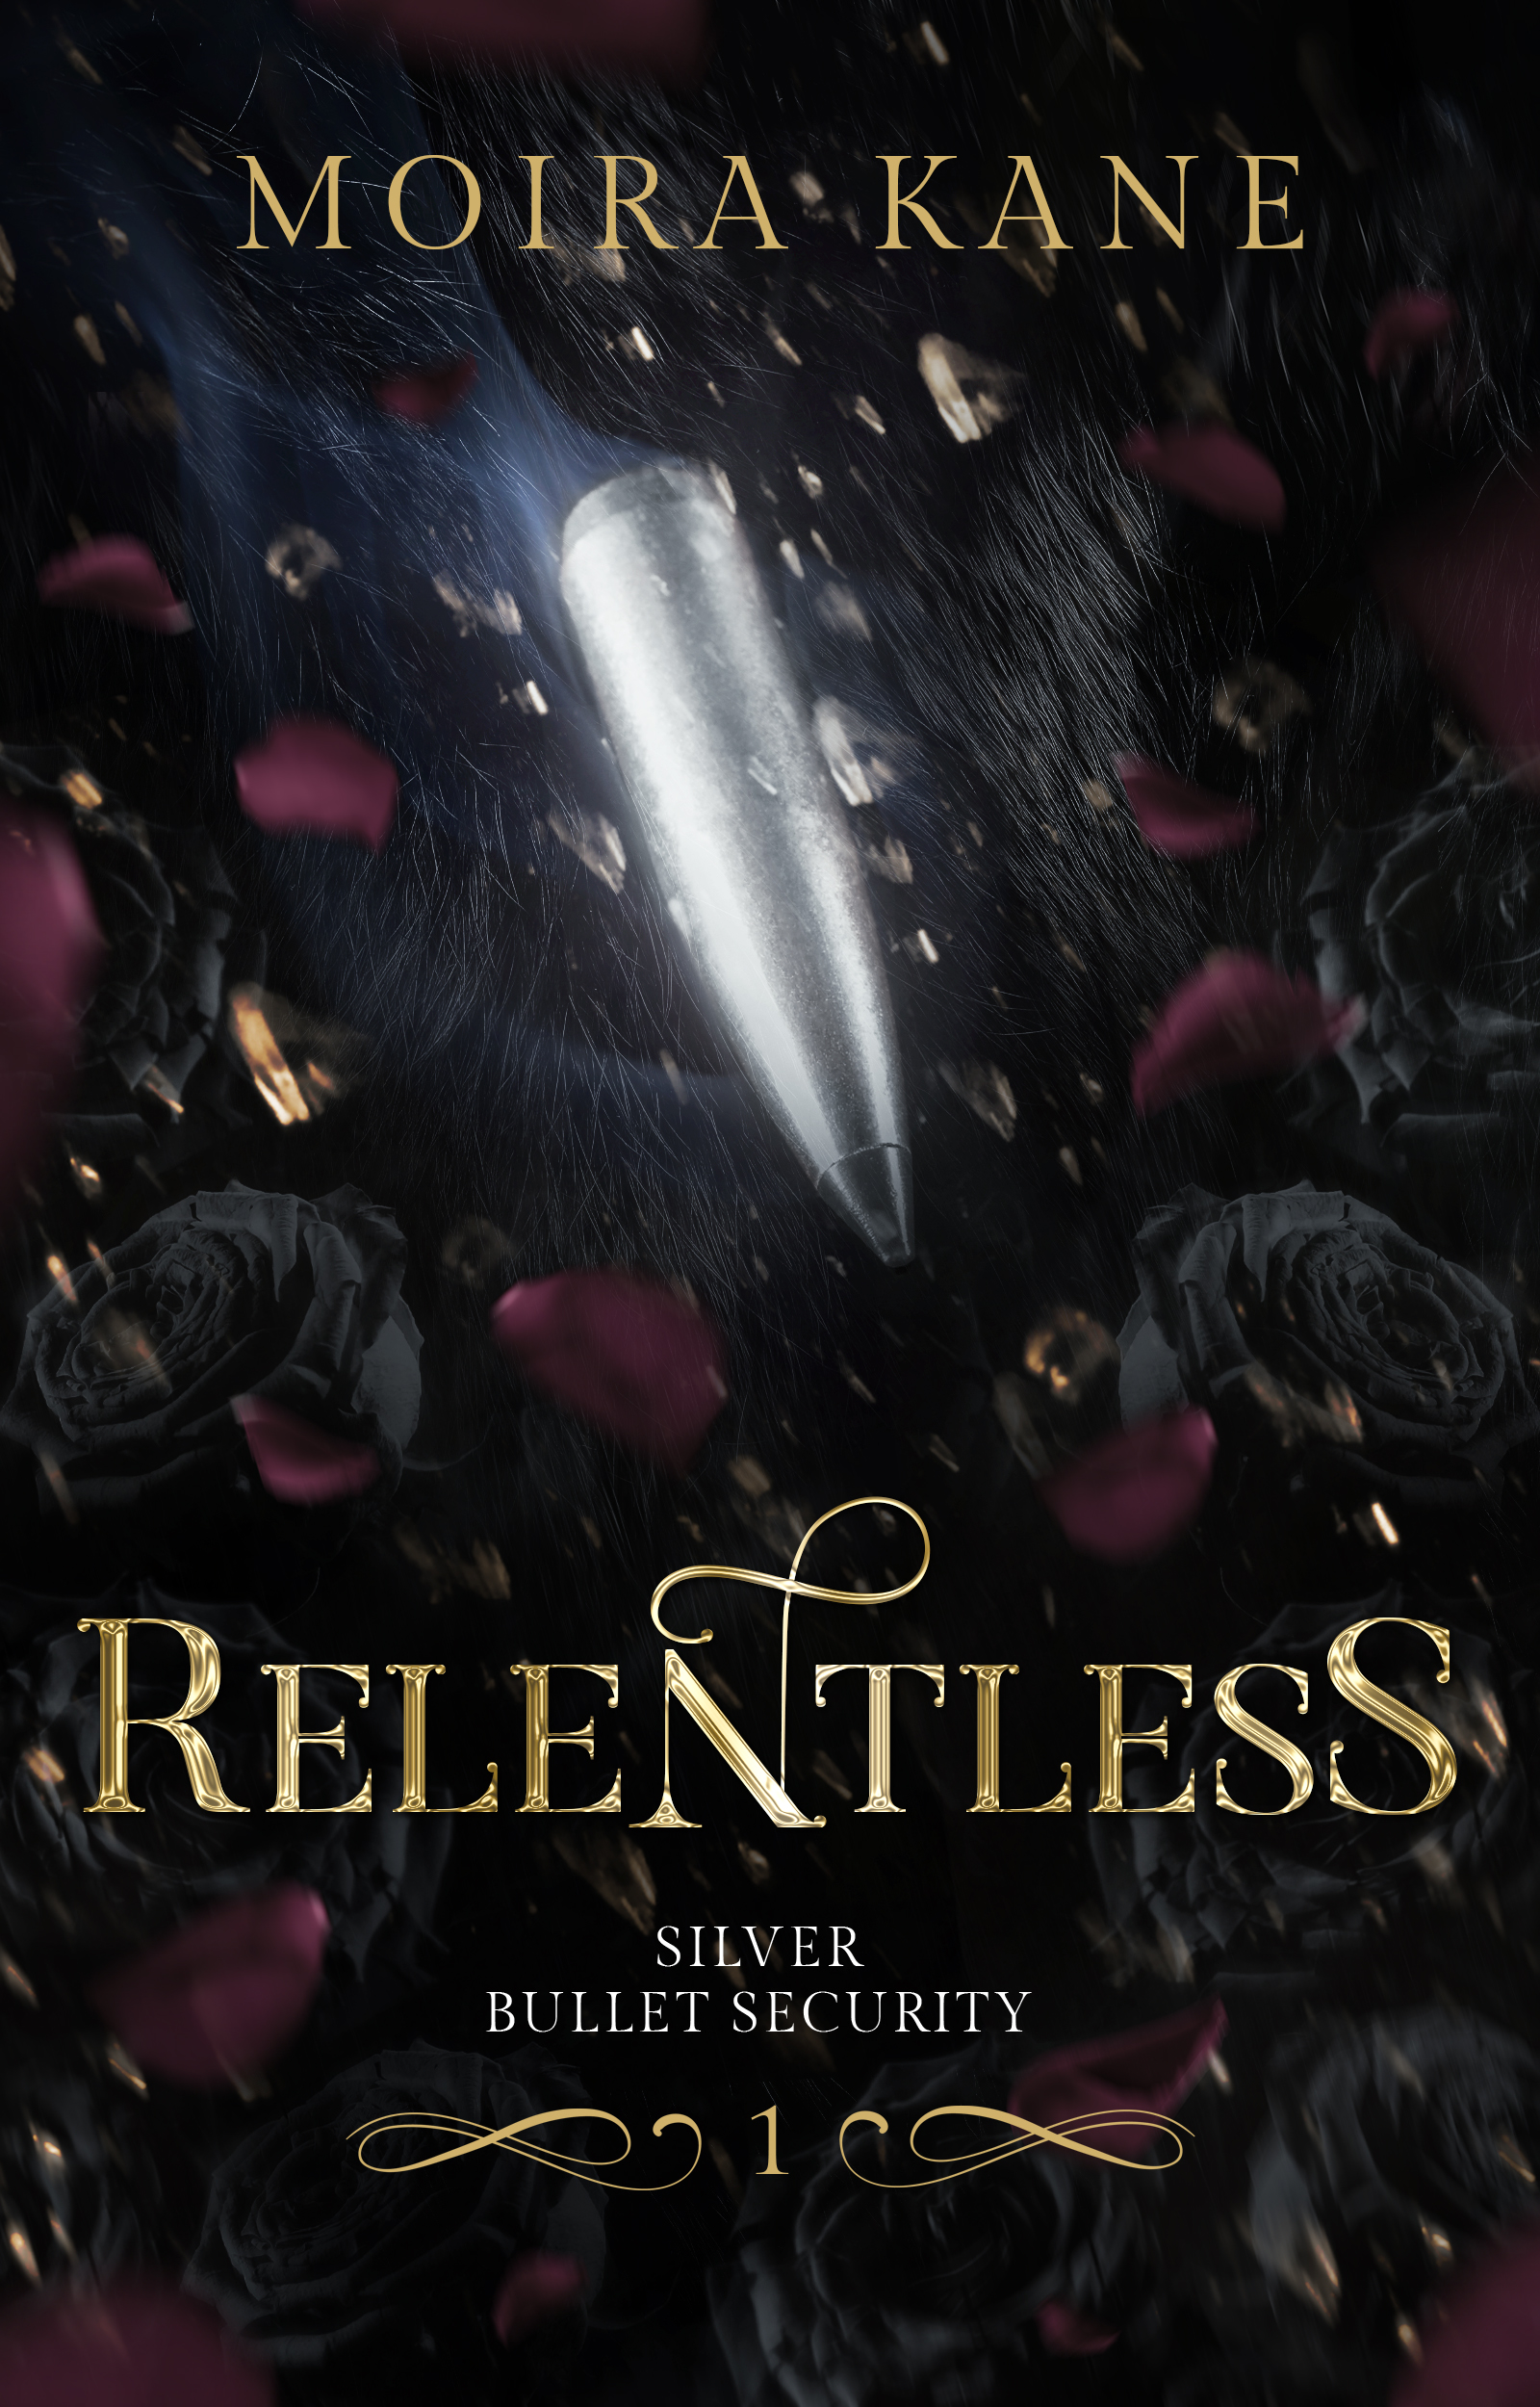 Silver bullet in motion with black roses in the background. Image text reads Relentless by Moira Kane